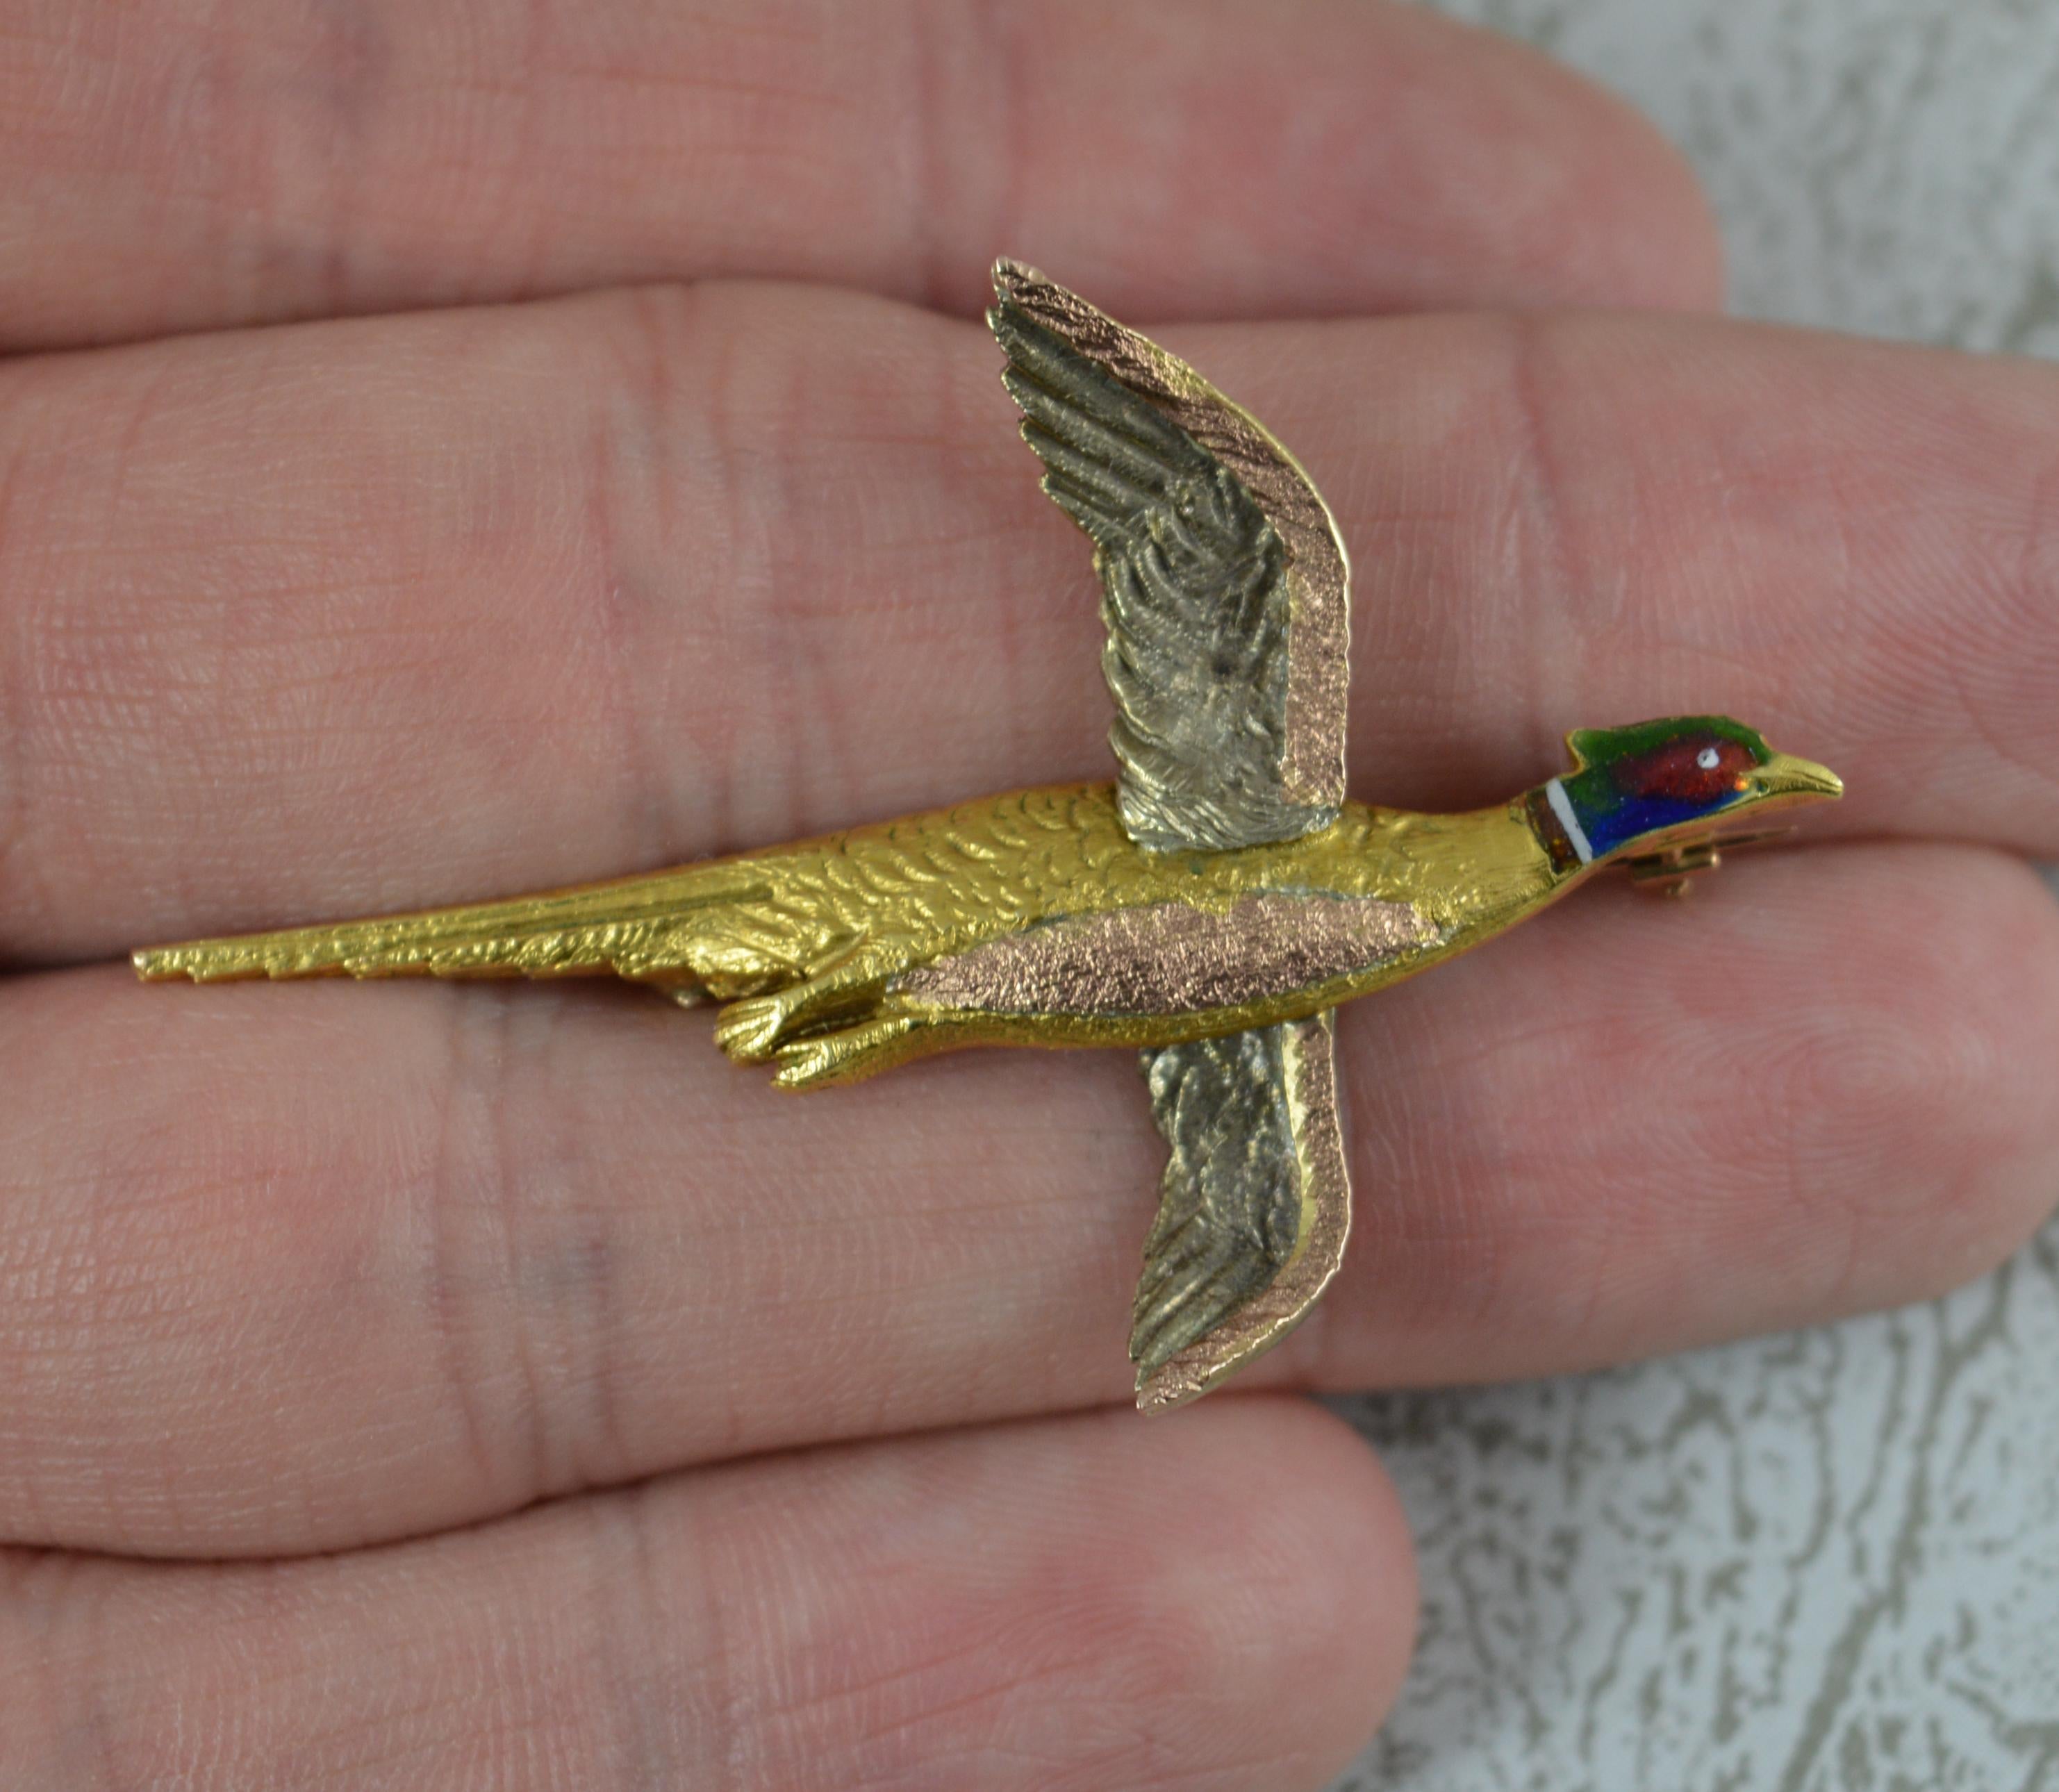 A superb quality vintage brooch by Alabaster and Wilson.
9 carat gold example, predominantly 9ct yellow gold with rose and white gold highlights.
Bright, vivid enamelling to the head.
Flying pheasant shape.

CONDITION ; Excellent for age. Crisp